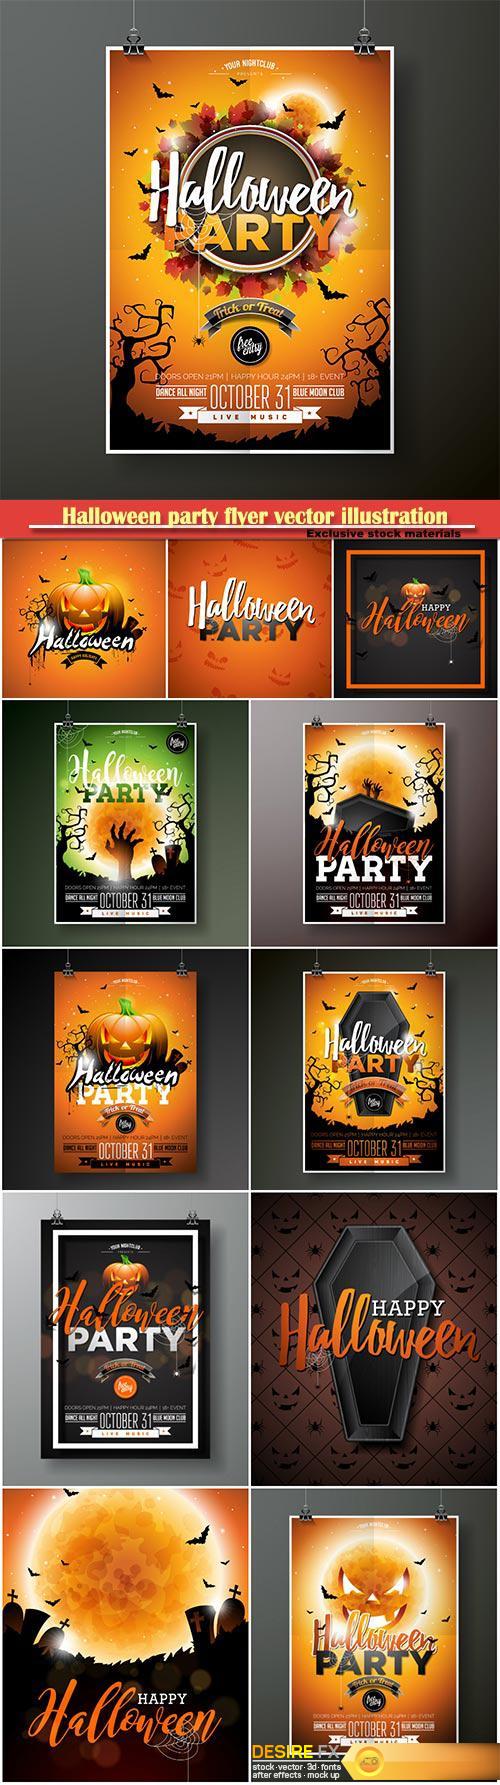 Halloween party flyer vector illustration with moon on orange sky background, spiders and bats for party invitation, greeting card